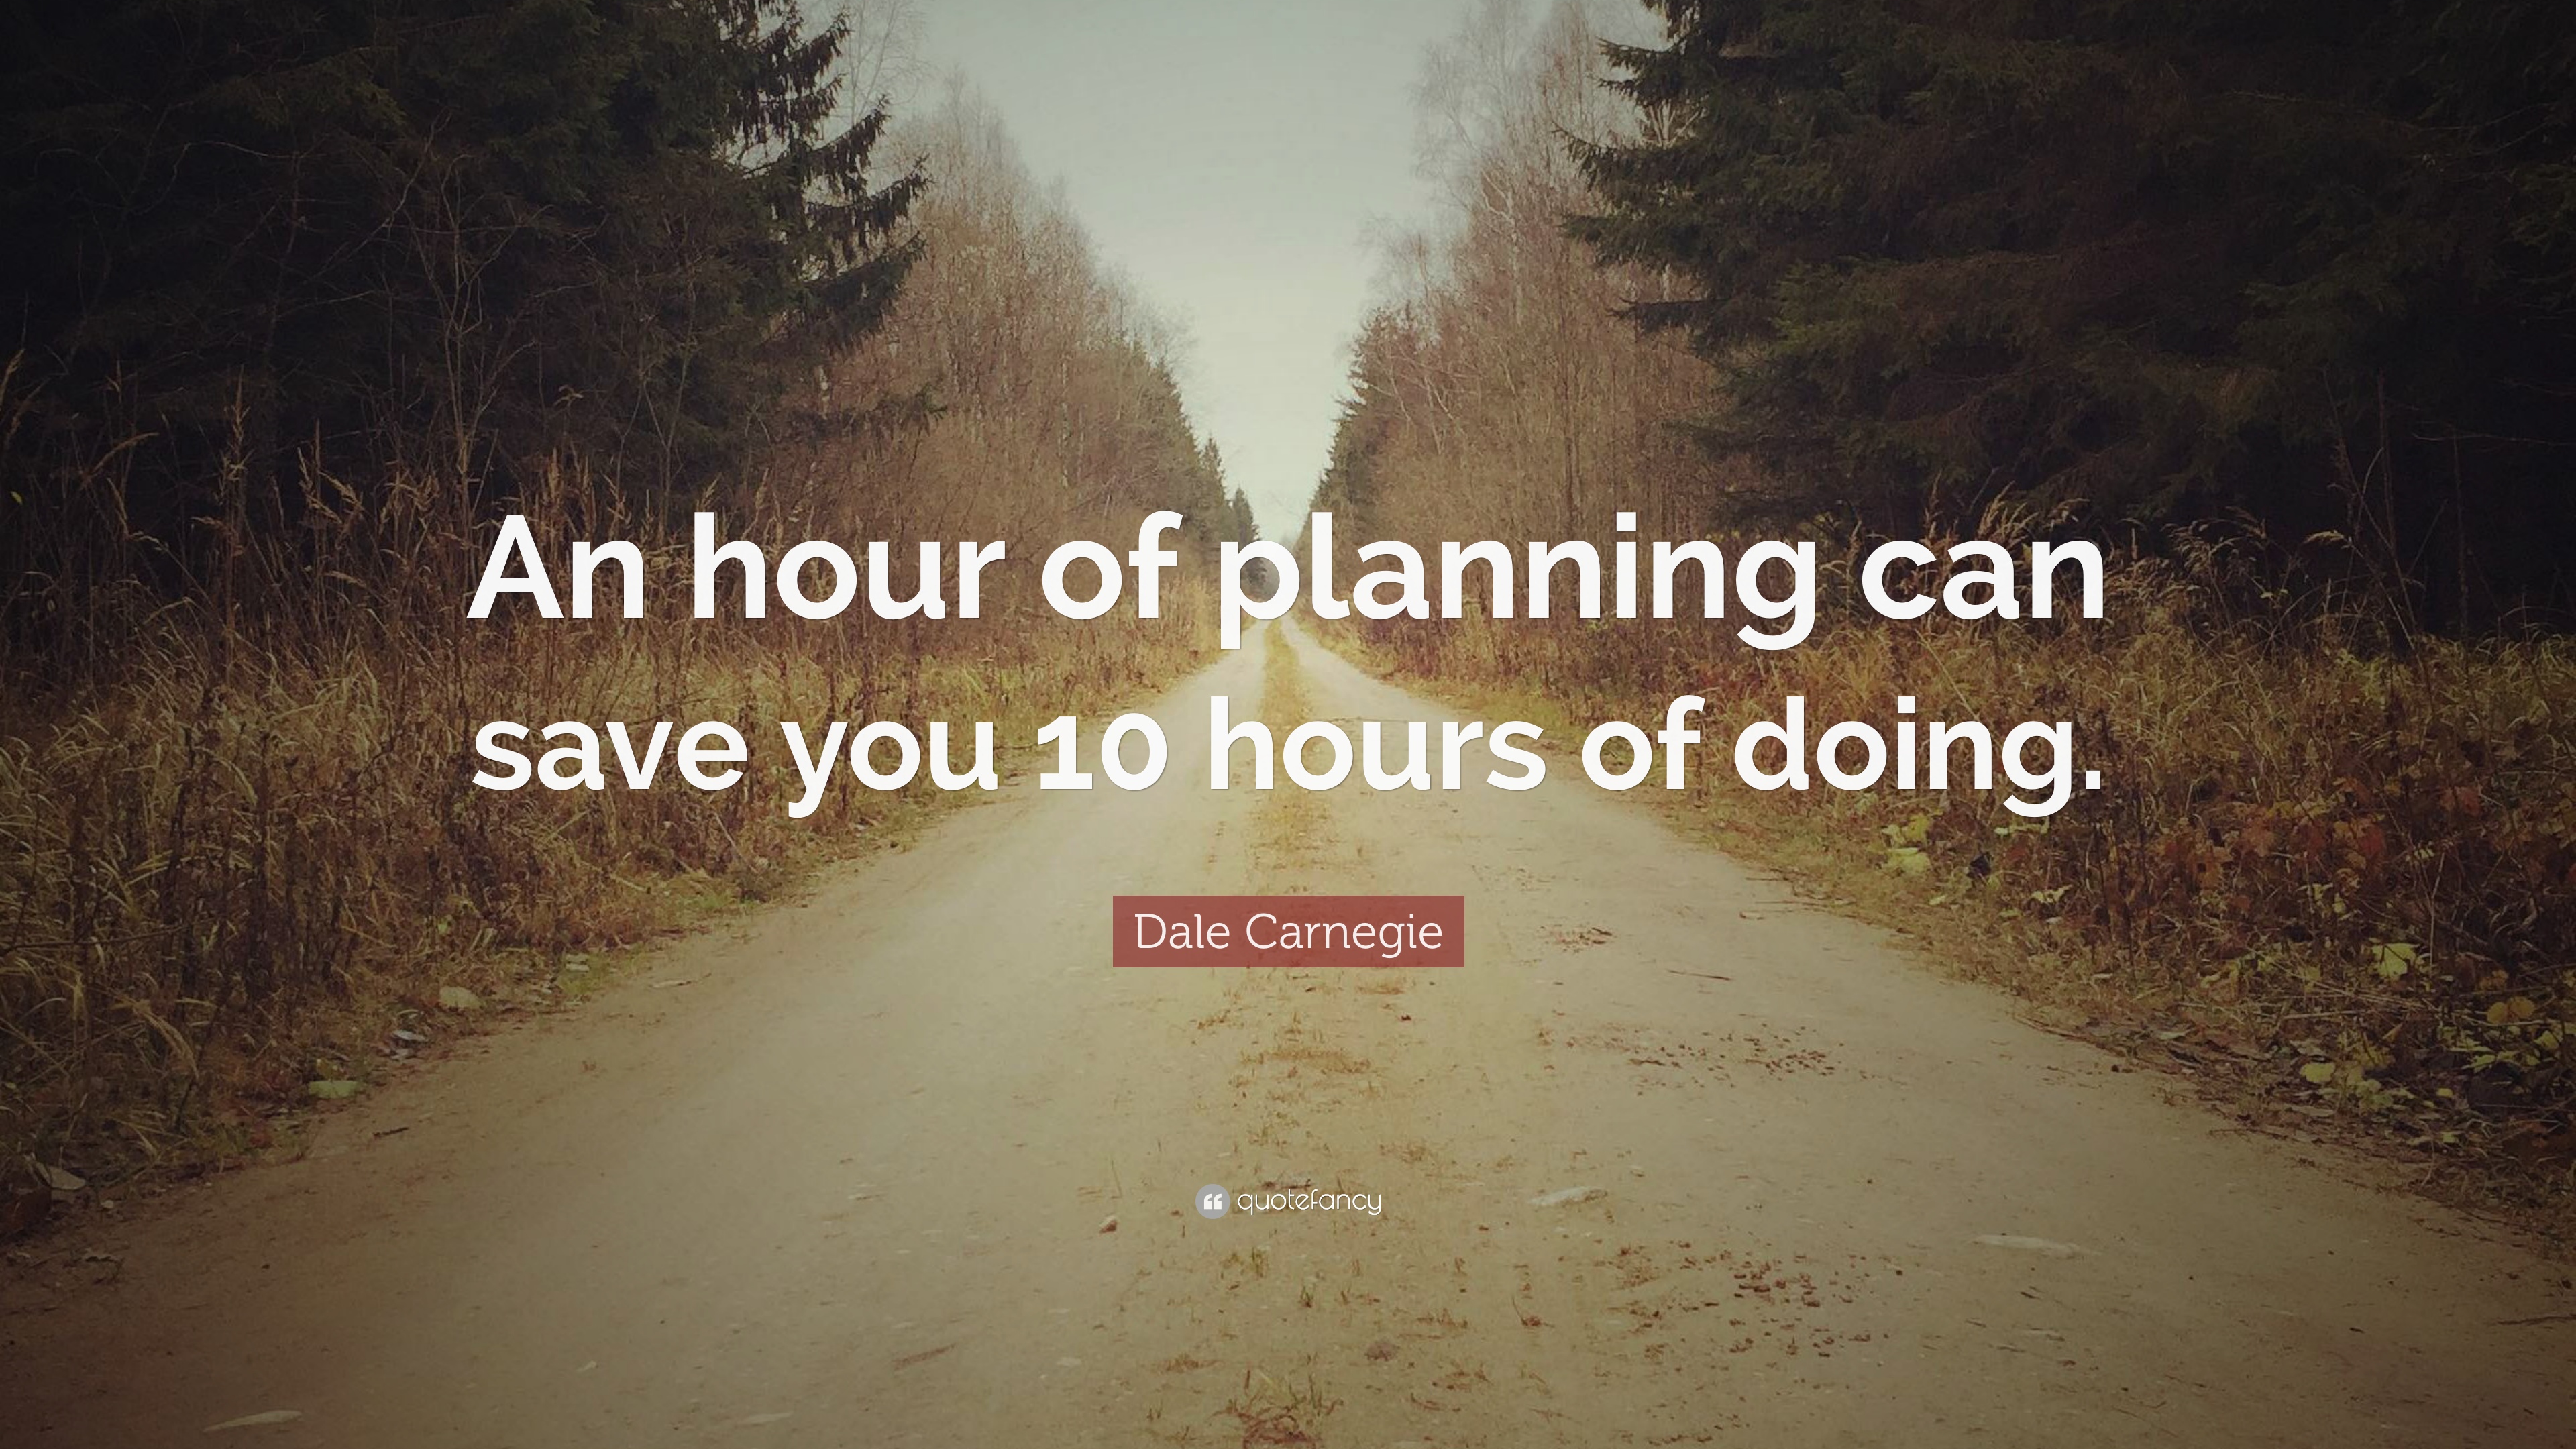 an hour of planning can save you 10 hours of doing. dale carnegie